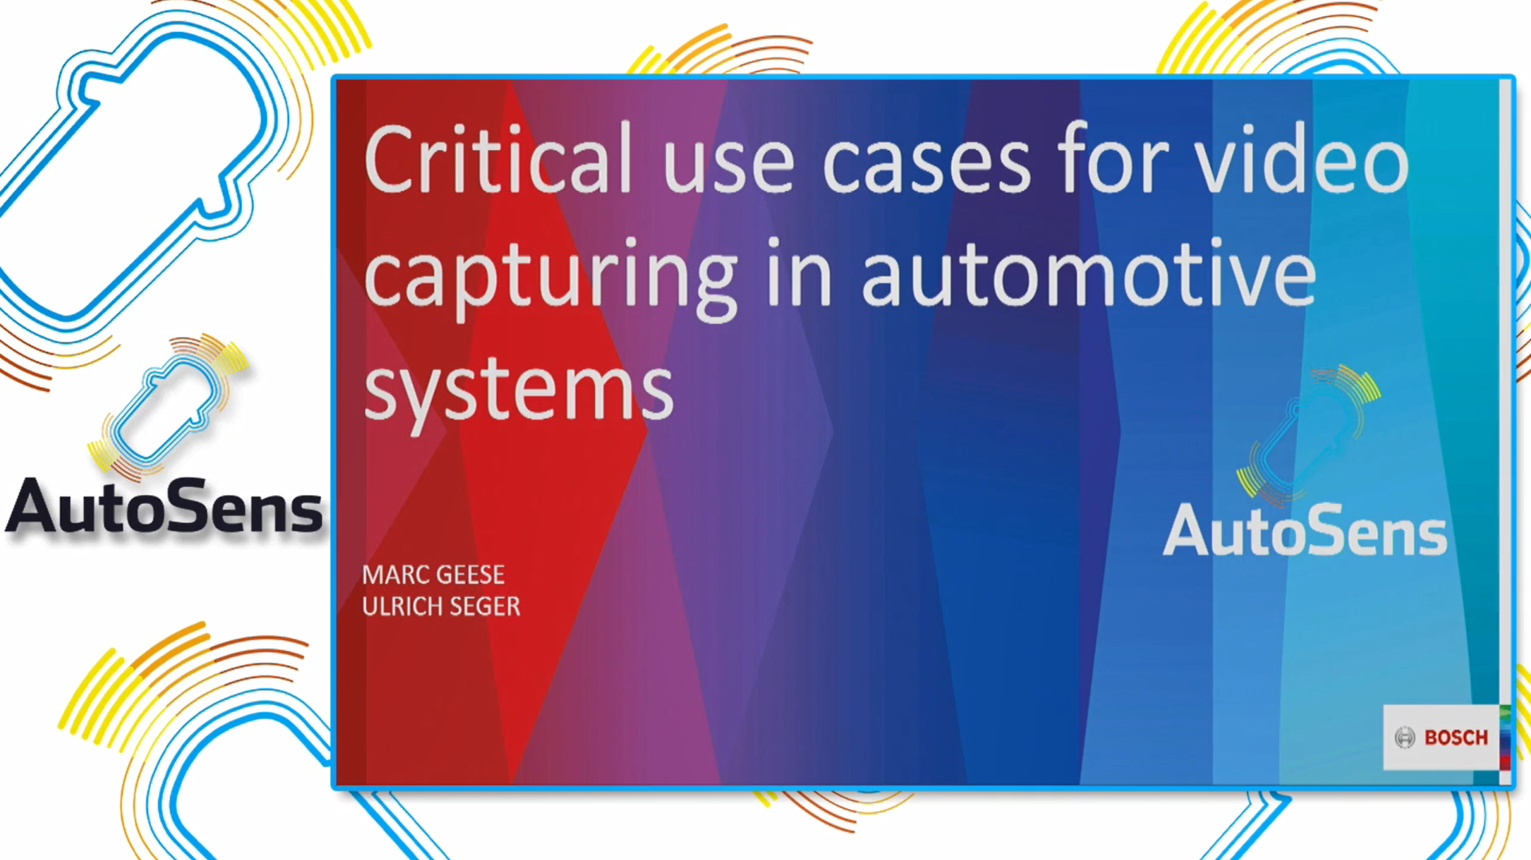 Critical use cases for video capturing systems in autonomous driving applications 